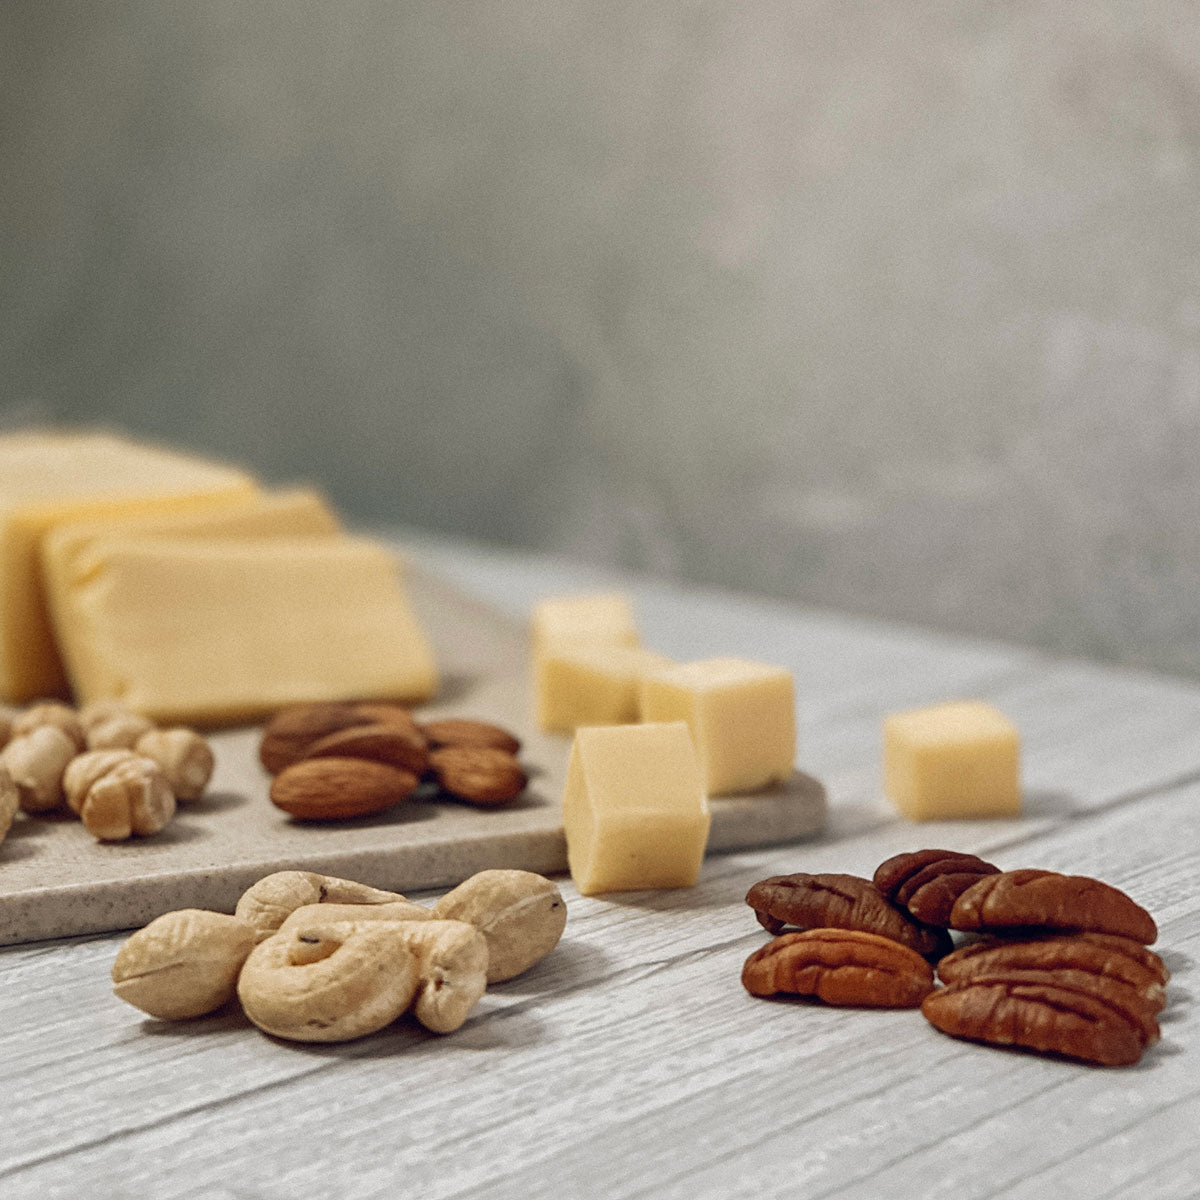 Cheese with nuts